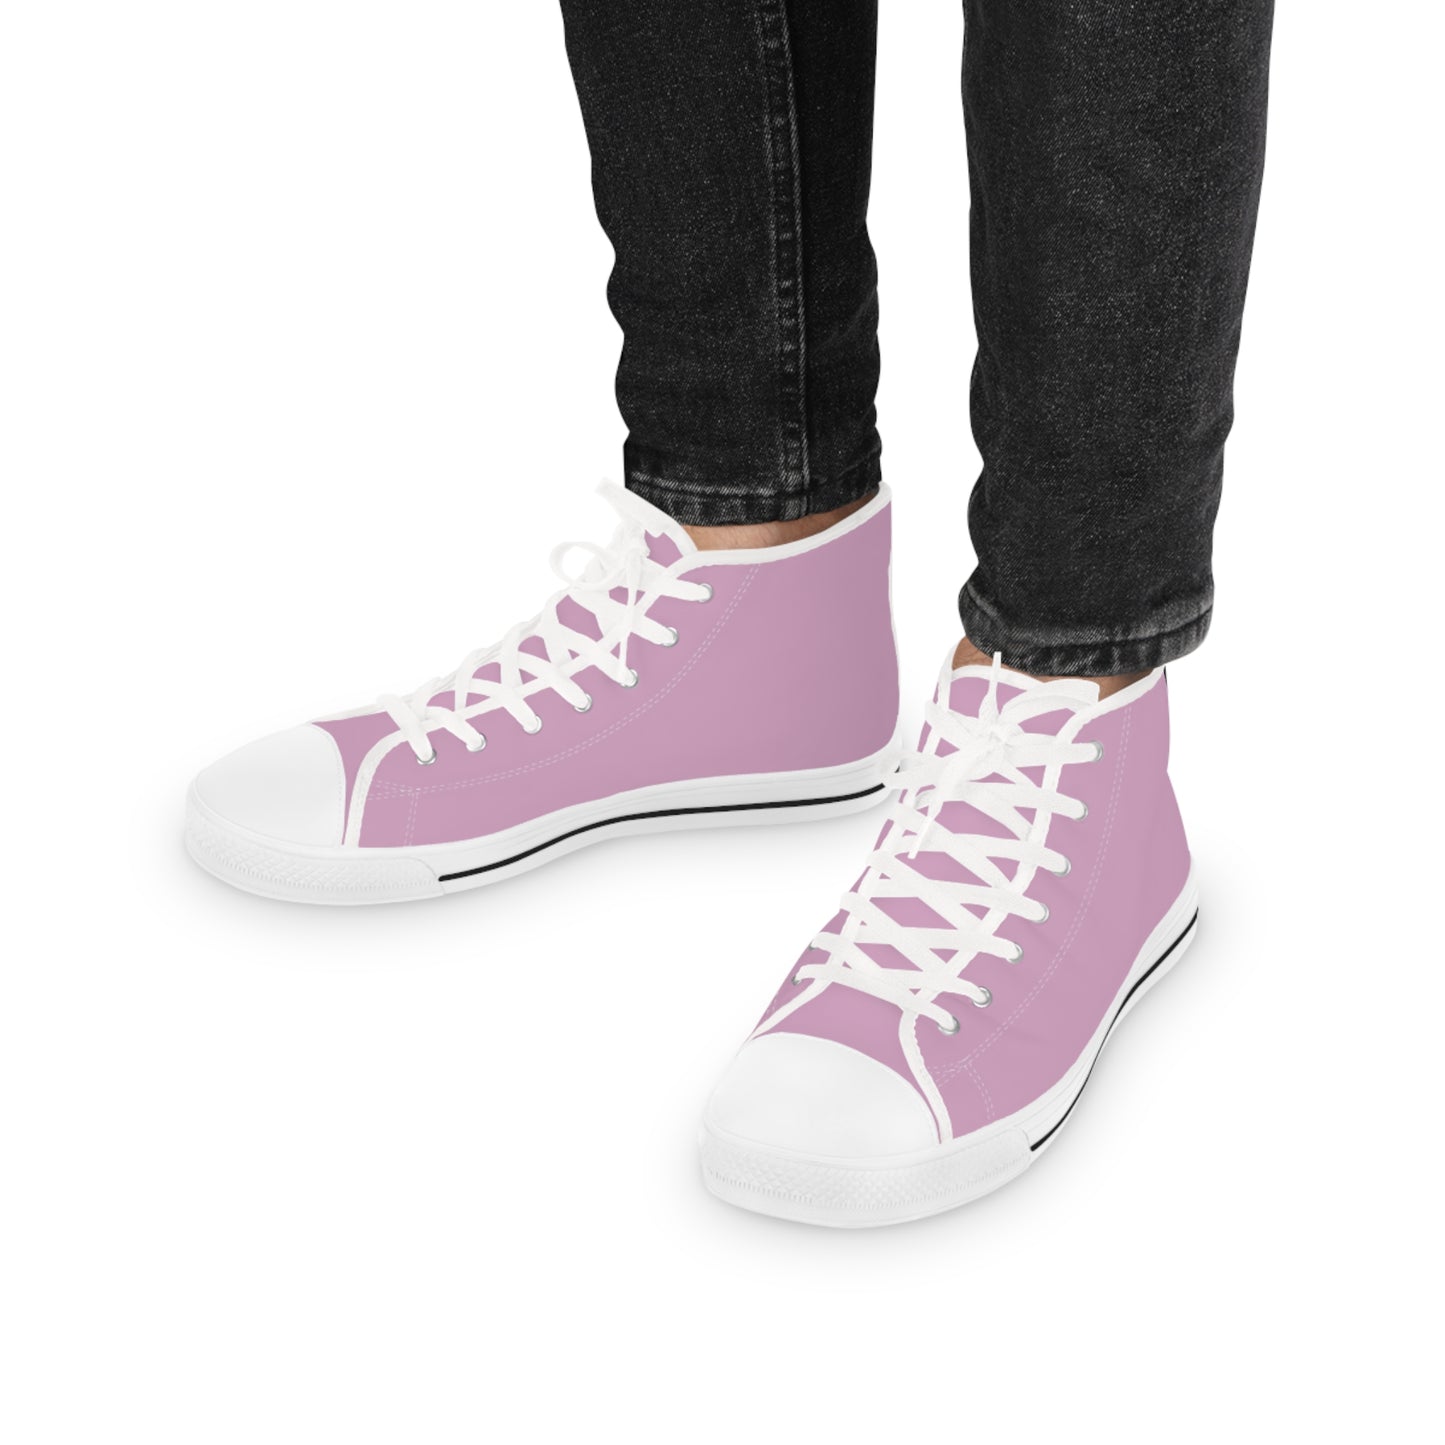 Men's Canvas High Top Solid Color Sneakers - Faded Bubblegum US 14 White sole